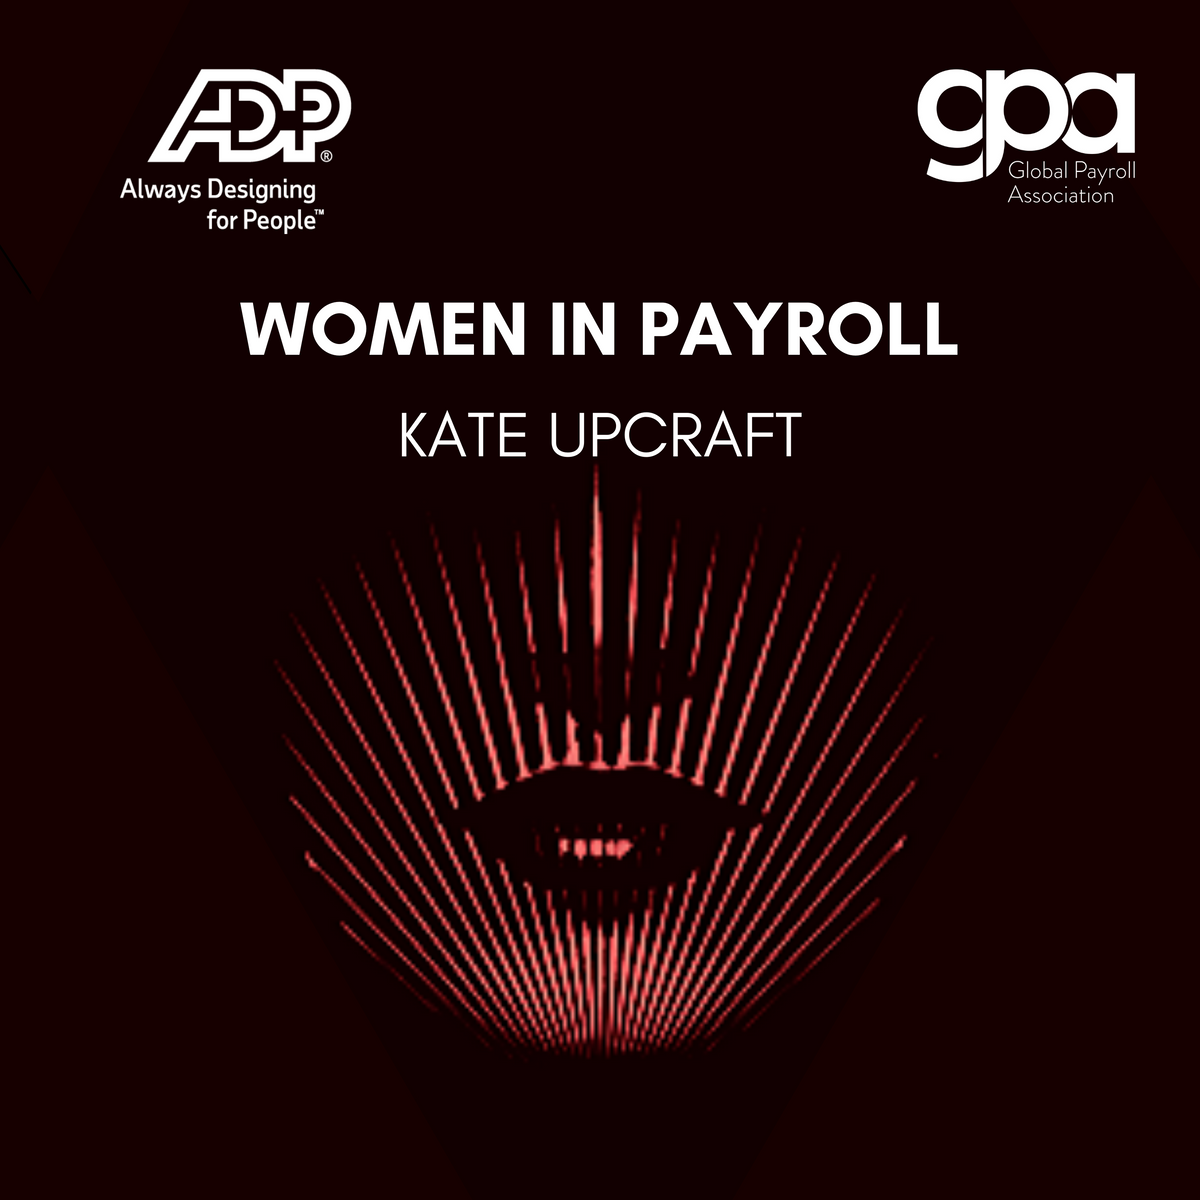 Women in Payroll: Kate Upcraft